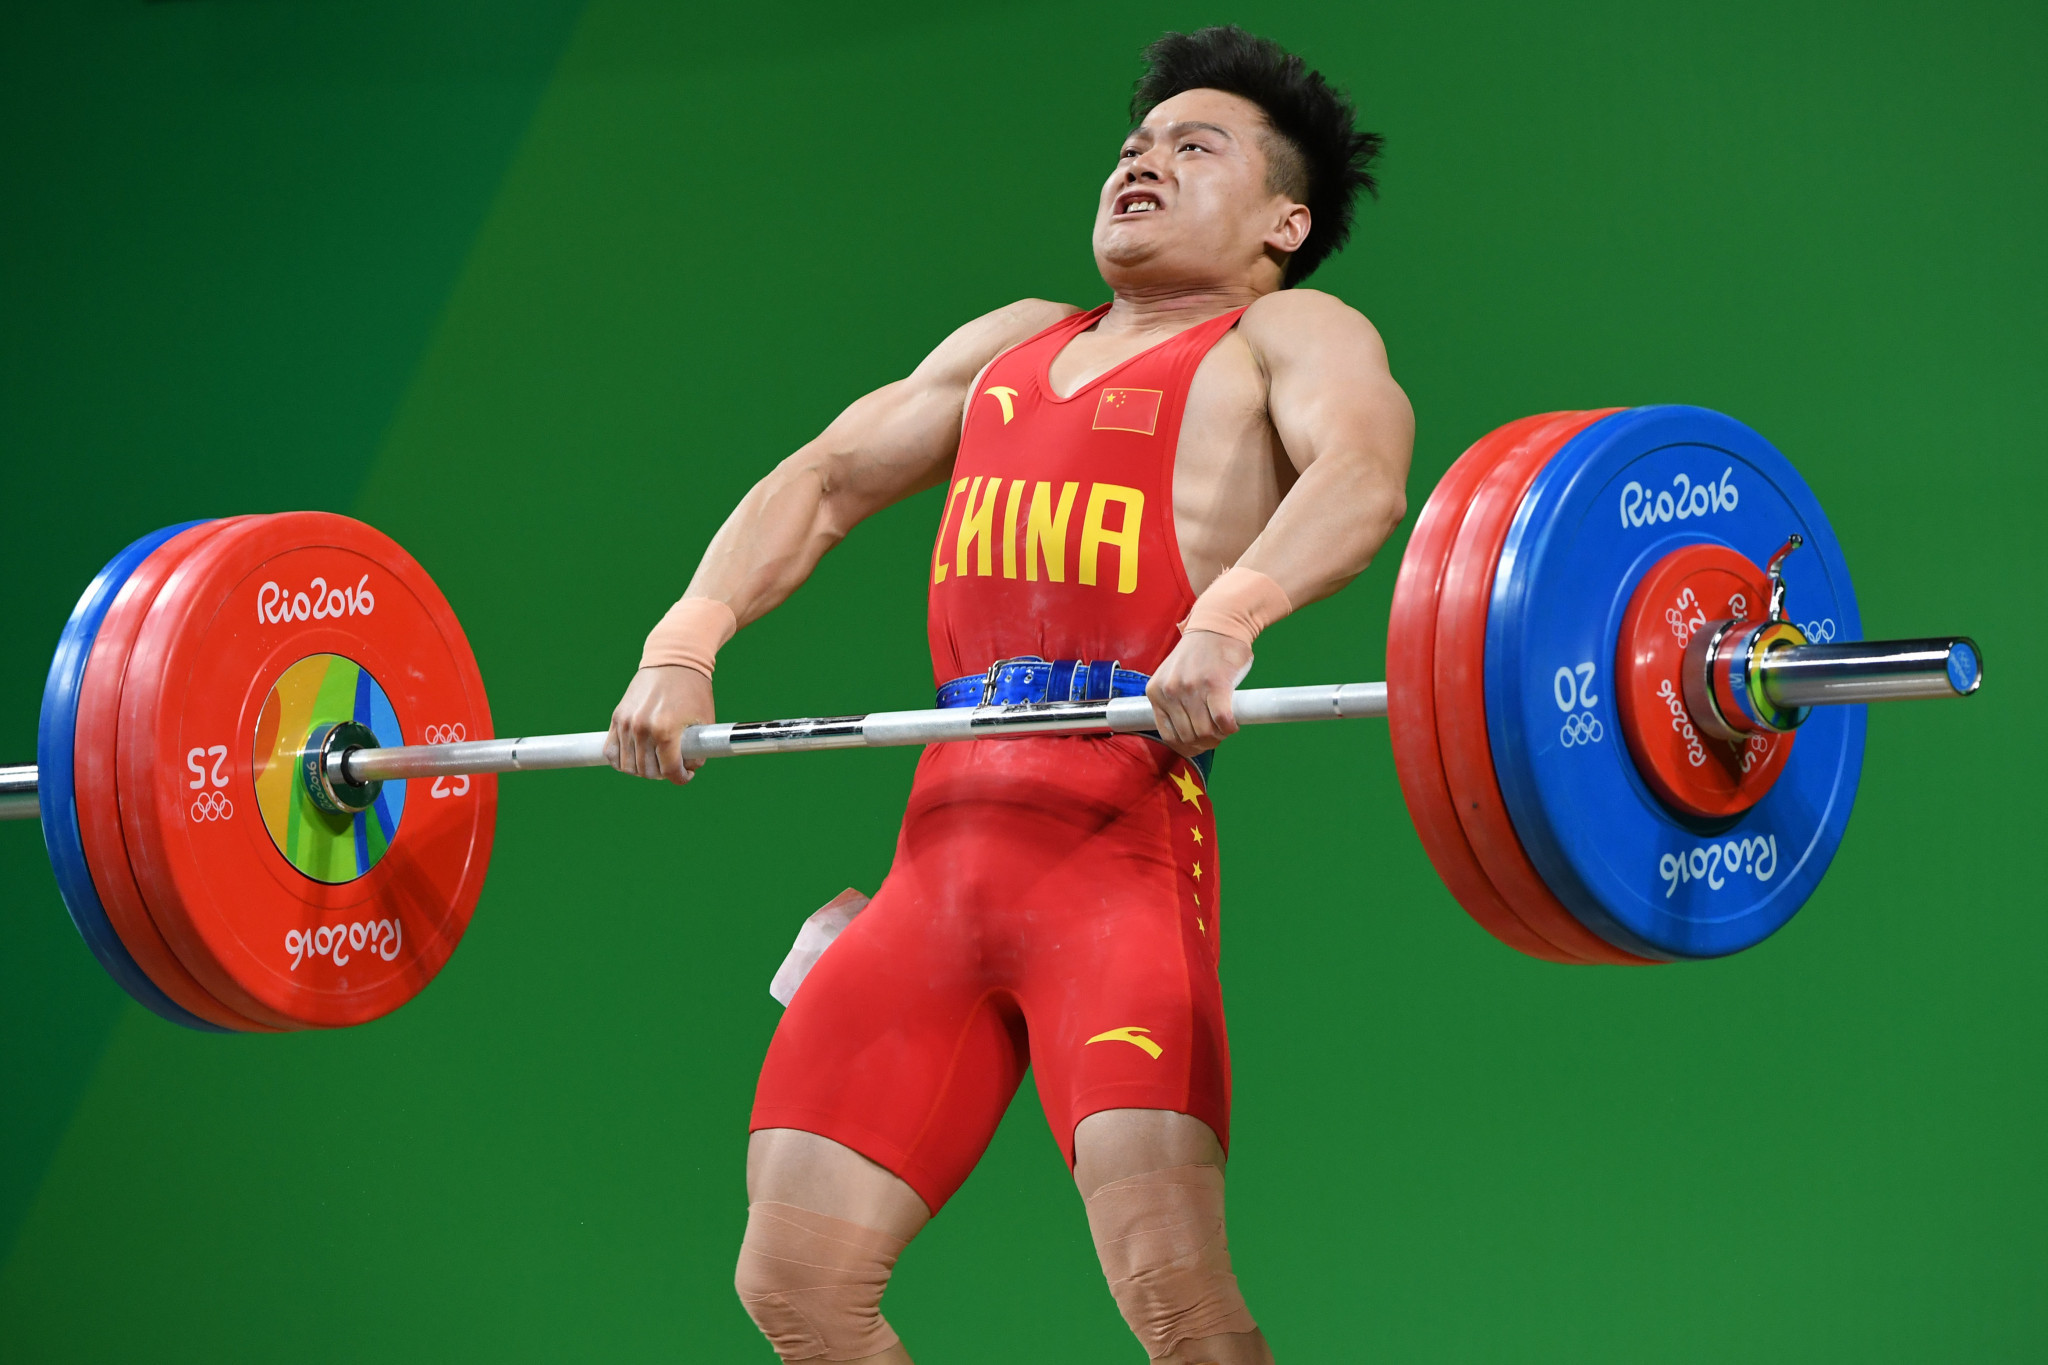 Weightlifting set to adopt new qualification system for Tokyo 2020 based on form